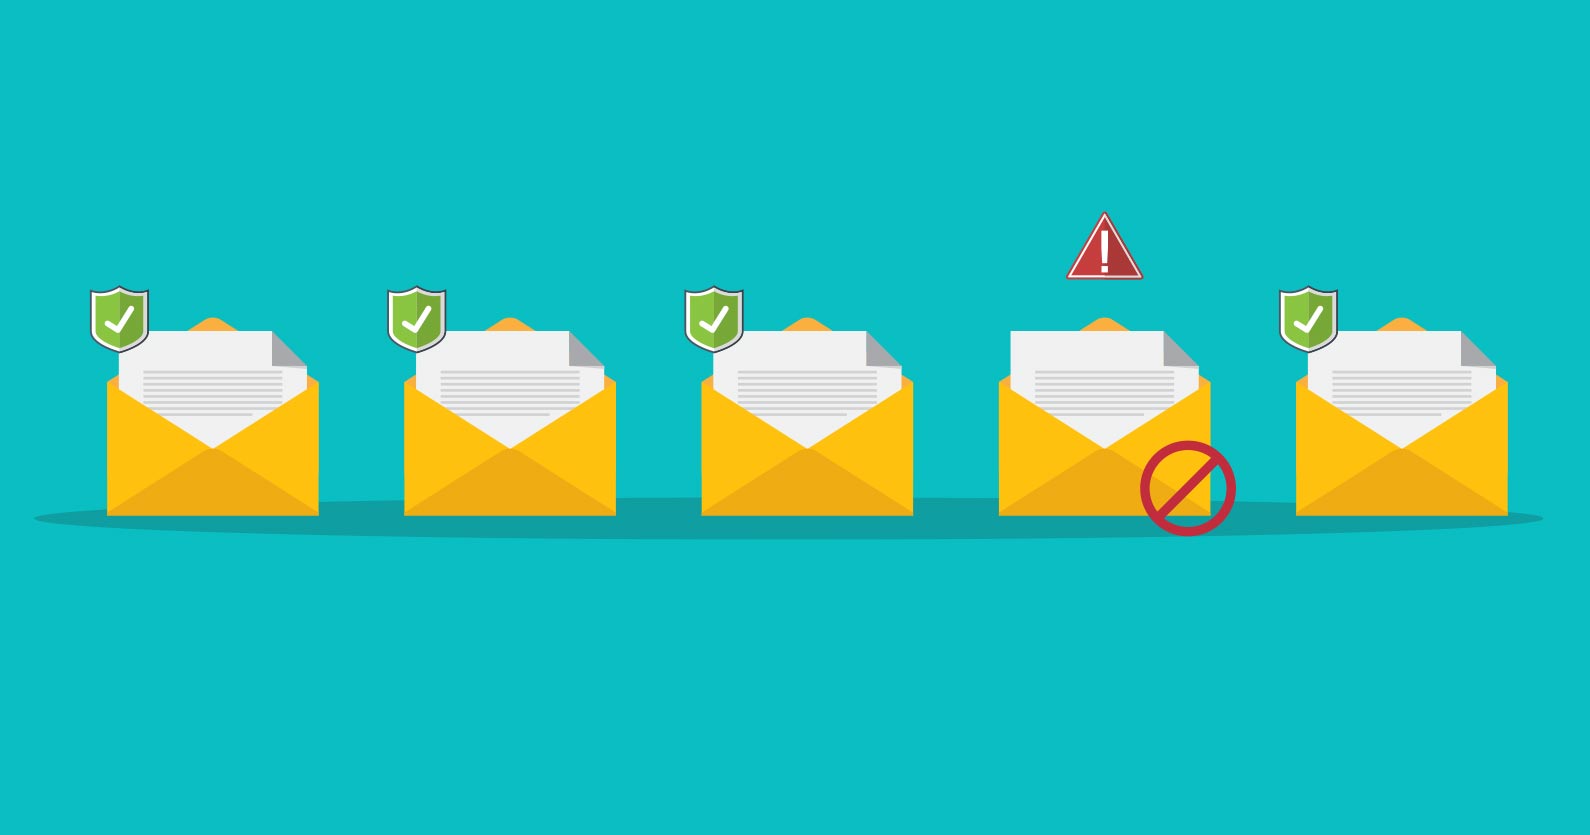 Illustration of five email folders where one is marked as spam